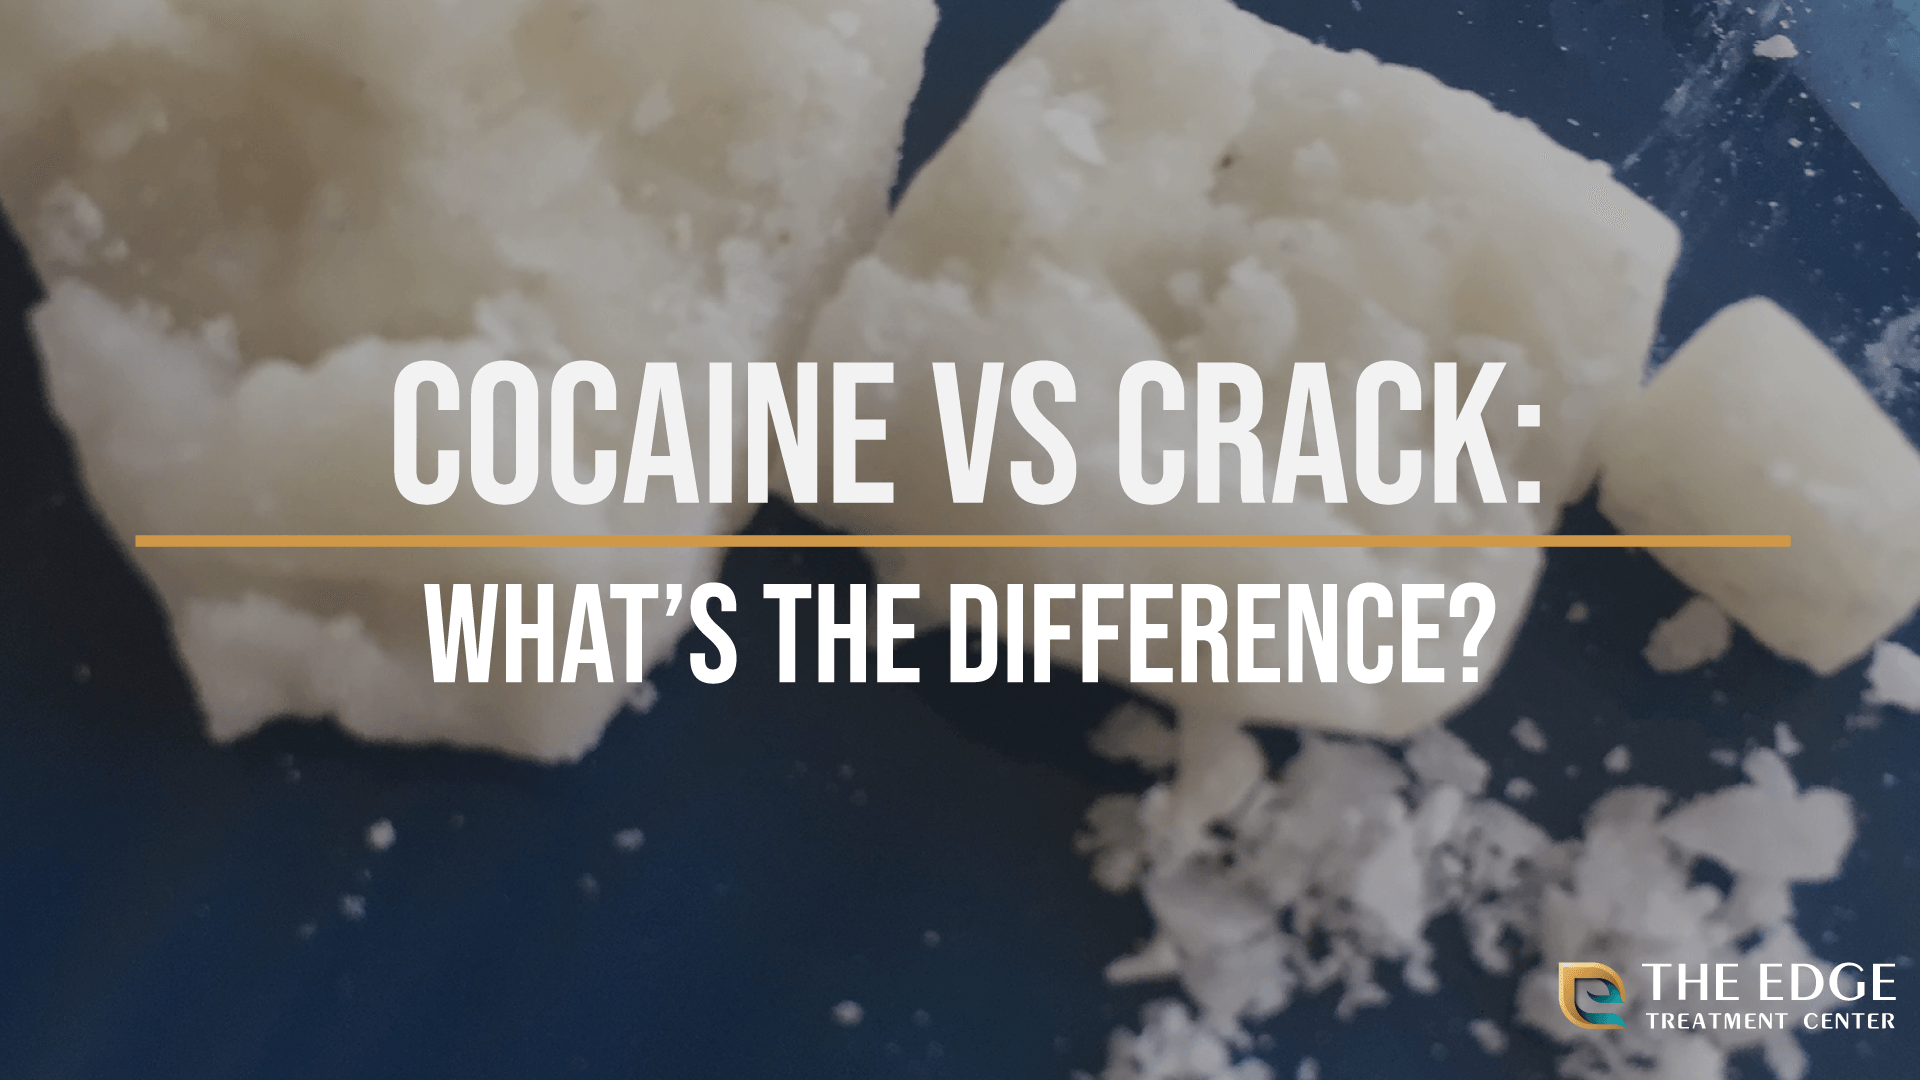 Cocaine vs Crack: What's the Difference